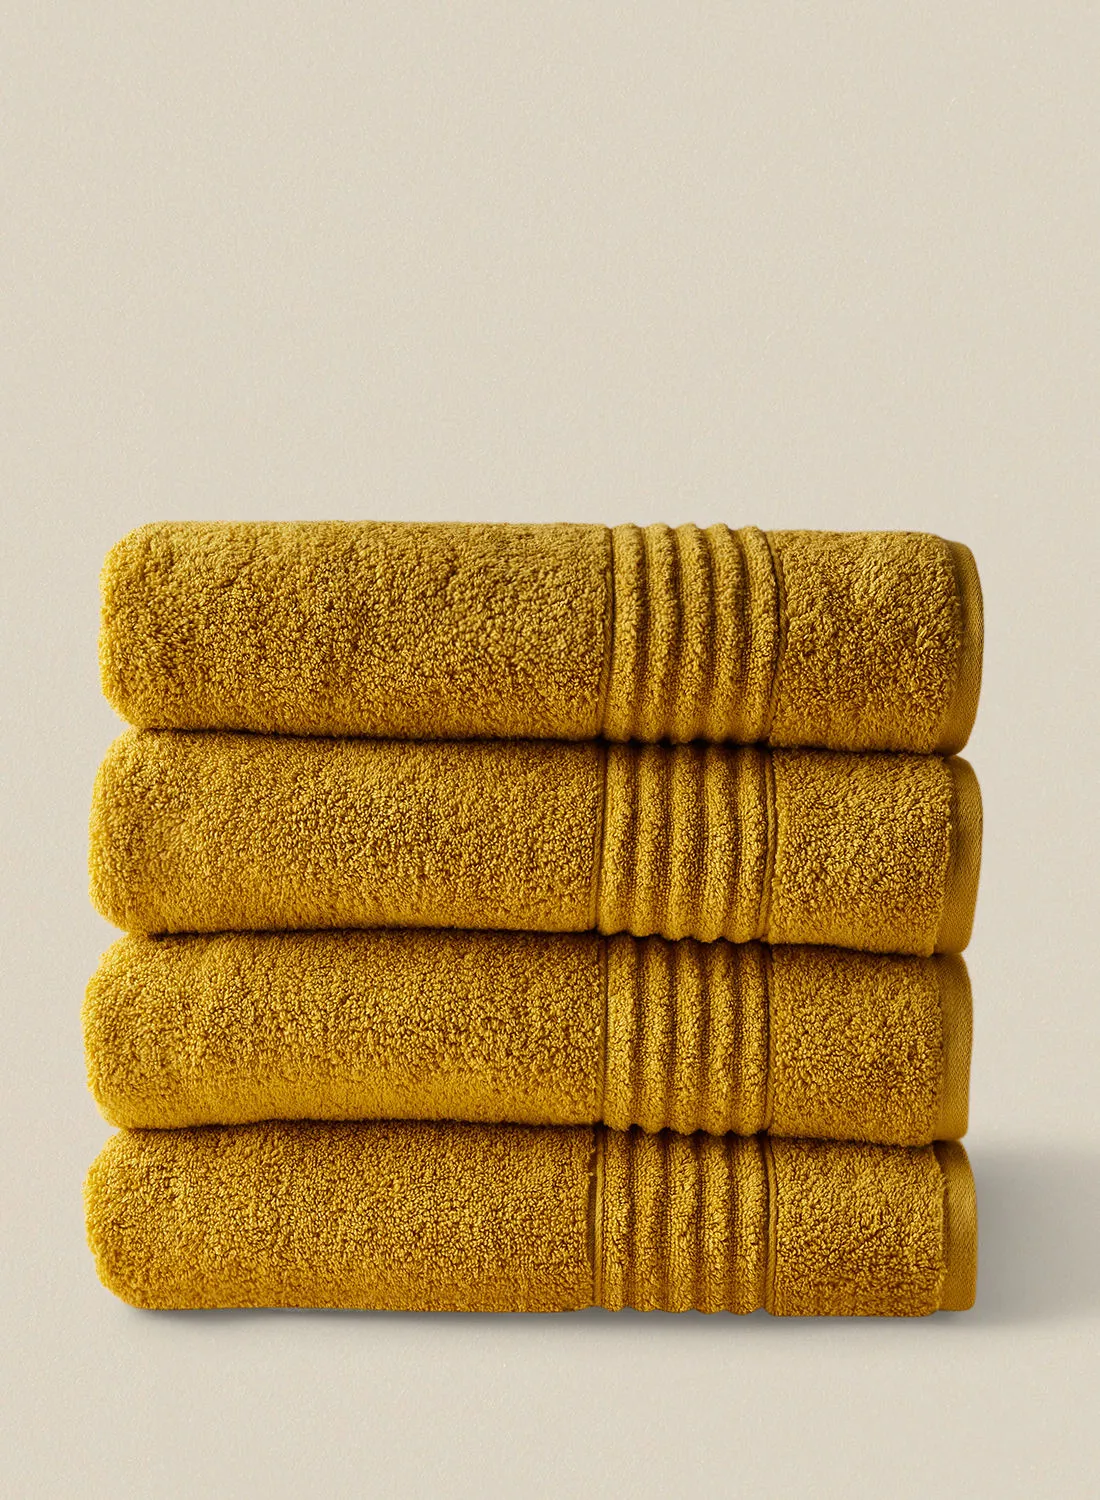 noon east 4 Piece Bathroom Towel Set - 500 GSM 100% Cotton - 4 Bath Towel - Gold Color - Highly Absorbent - Fast Dry